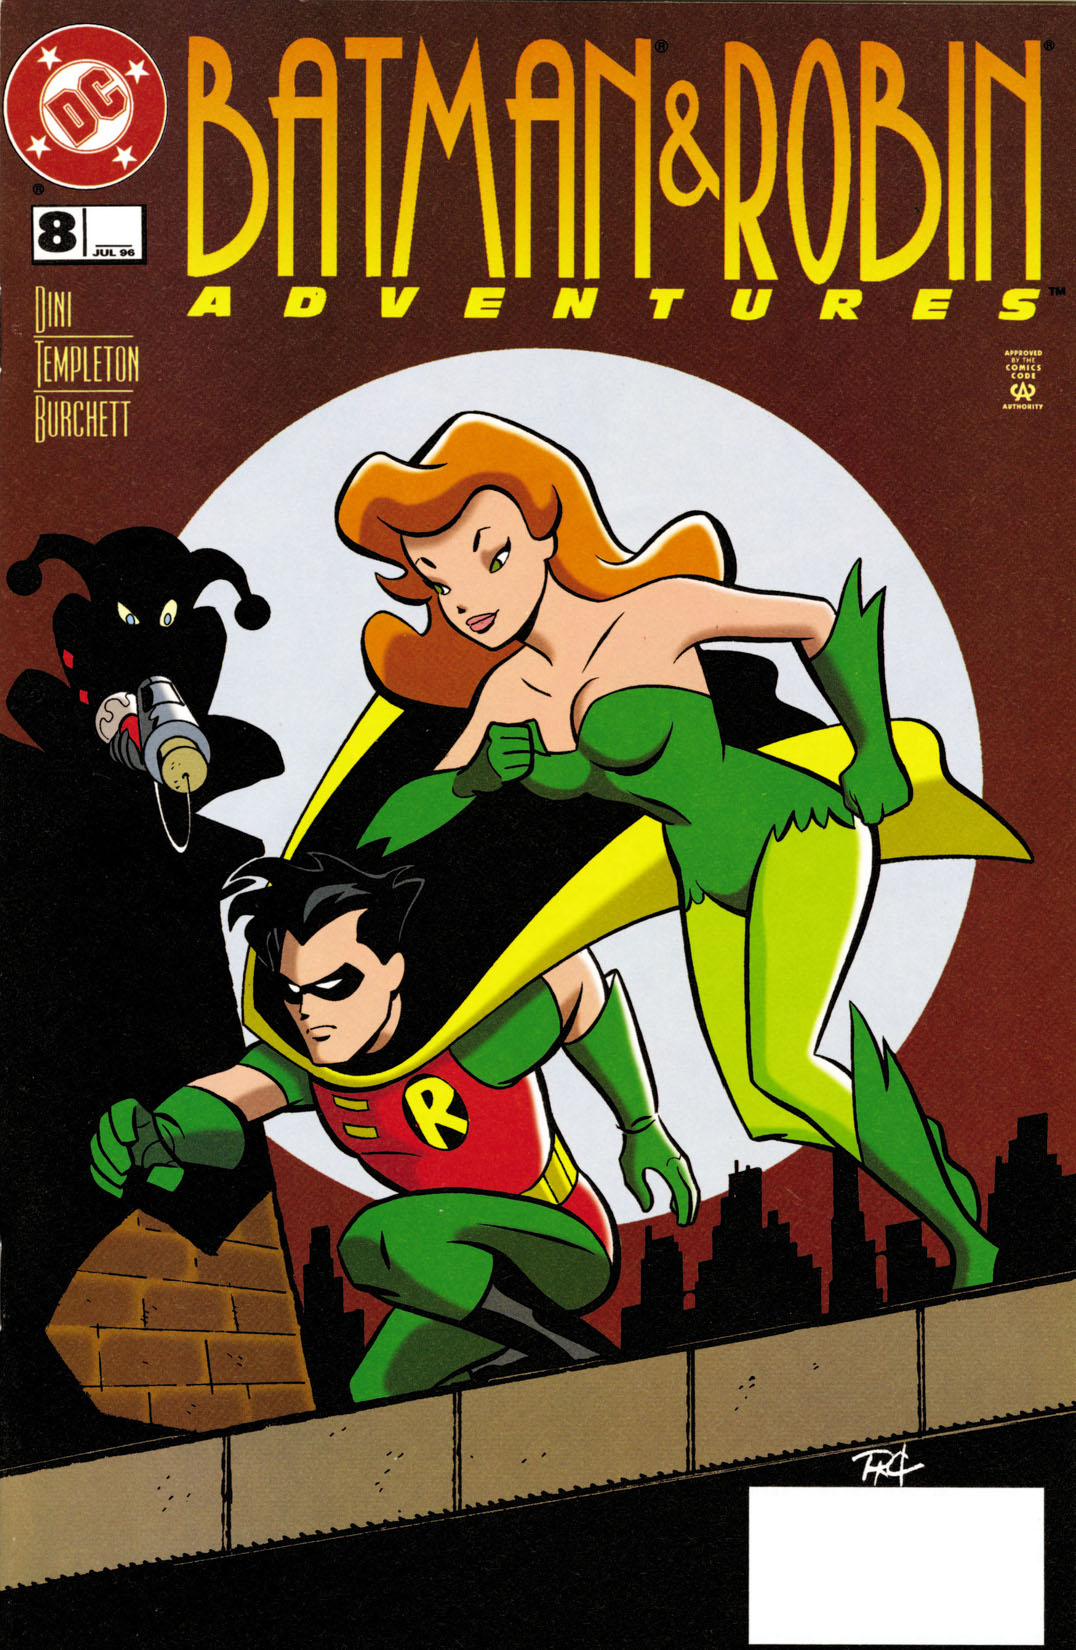 The Batman and Robin Adventures #8 preview images